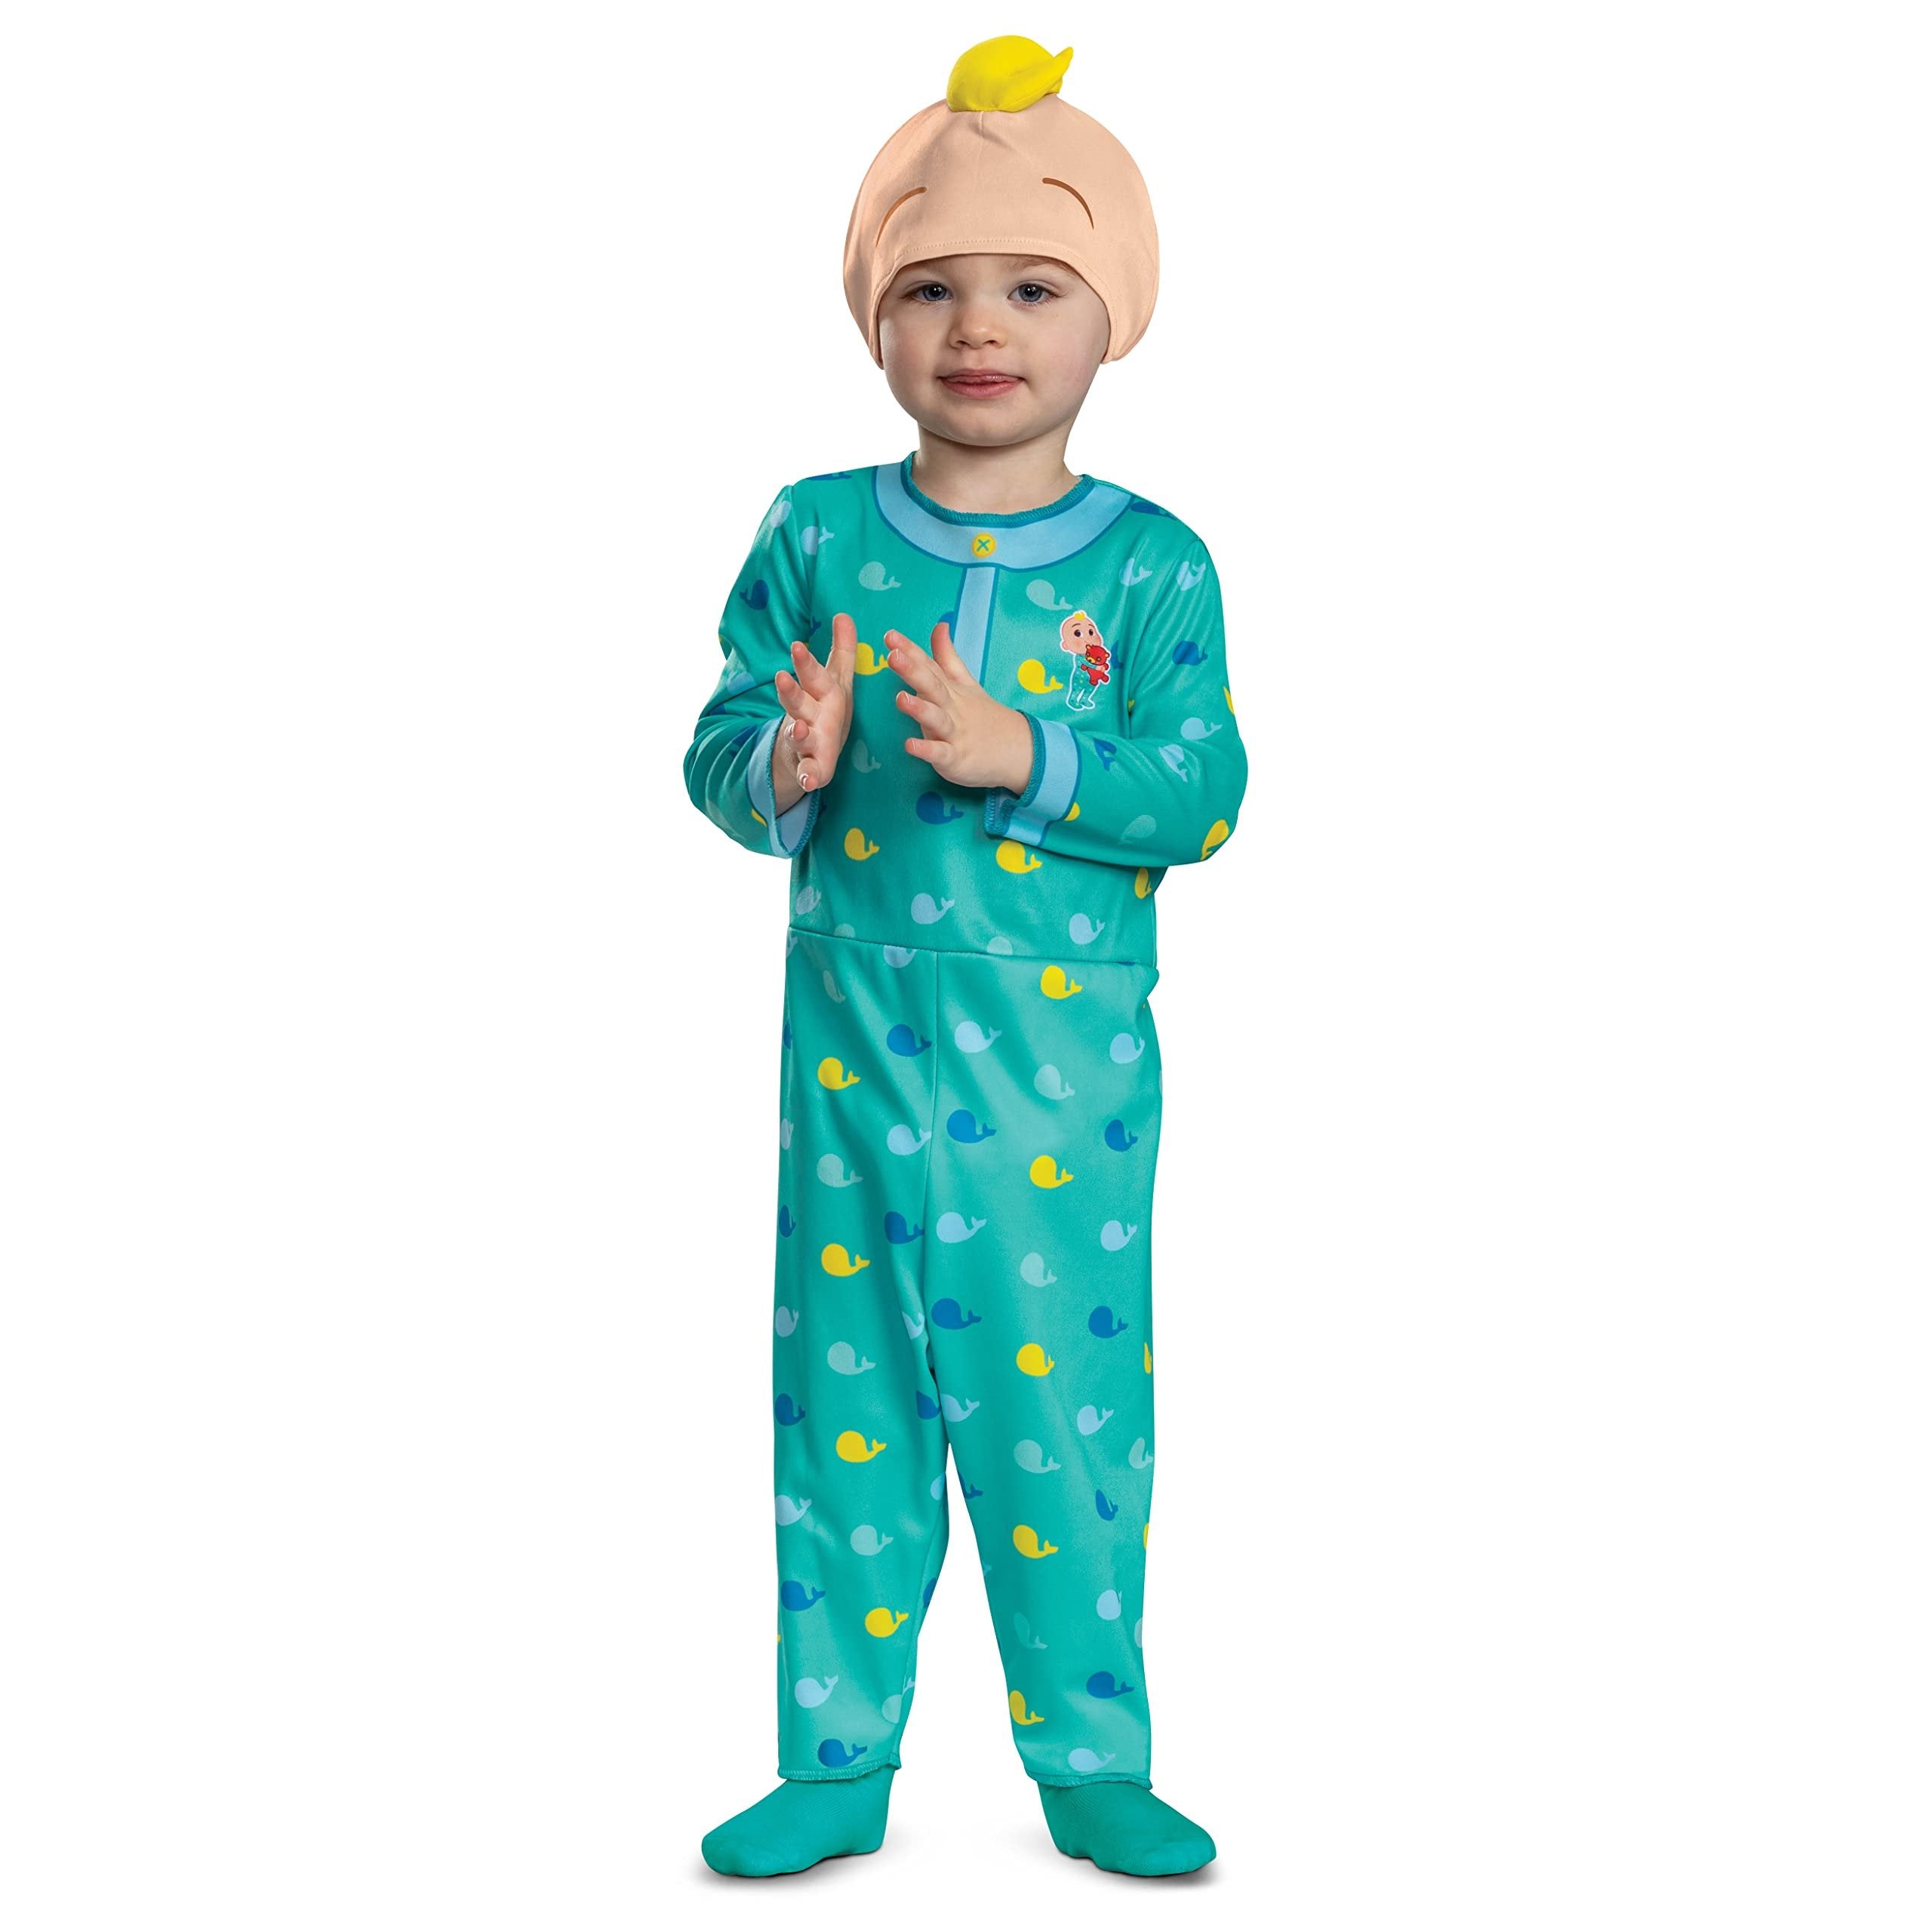 Disguise Cocomelon JJ Costume, Official Cocomelon Costume Pajama Outfit, Toddler Size (2T)